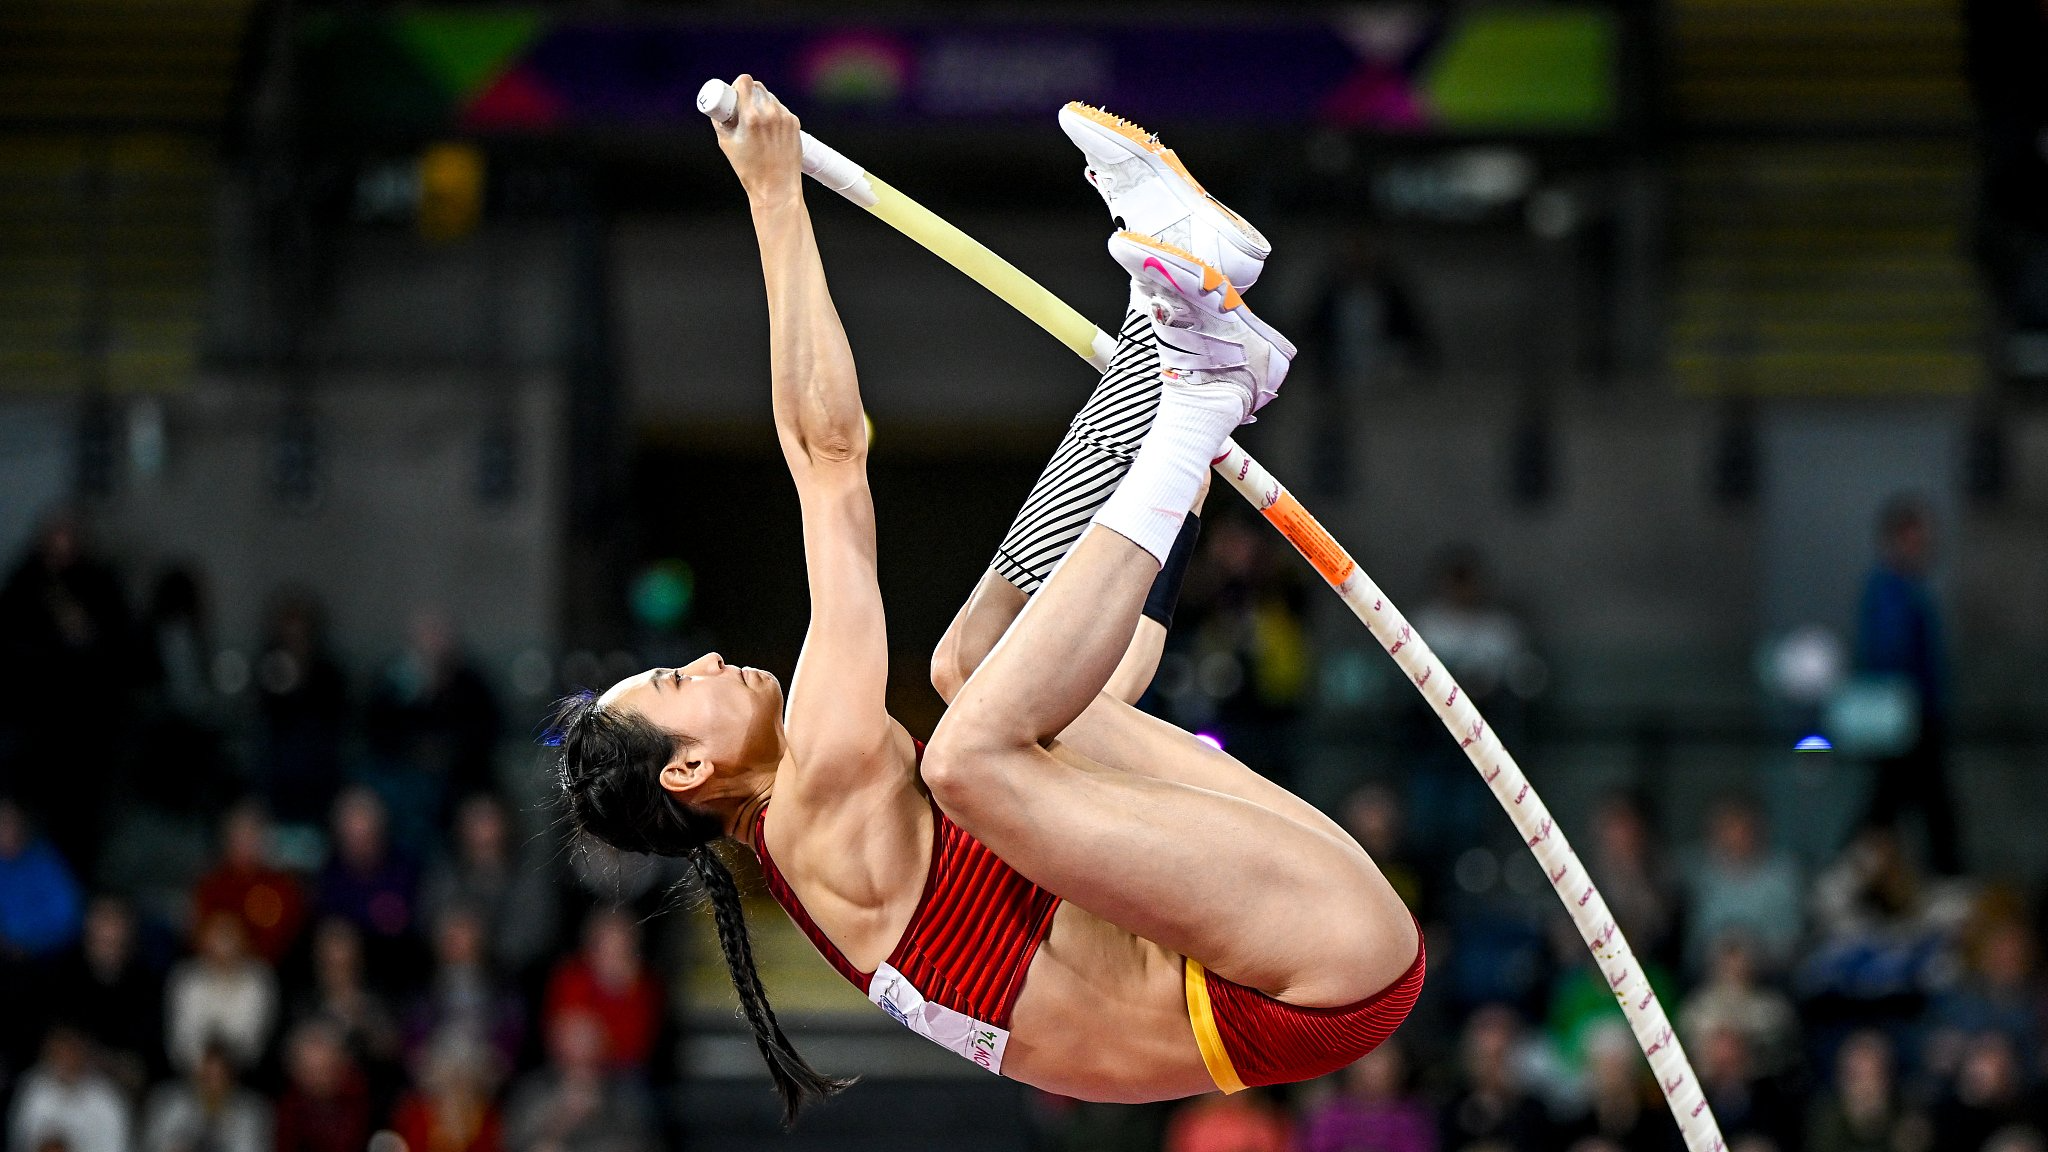 Chinese pole vaulter Li Ling pulls out of Paris Olympics after surgery